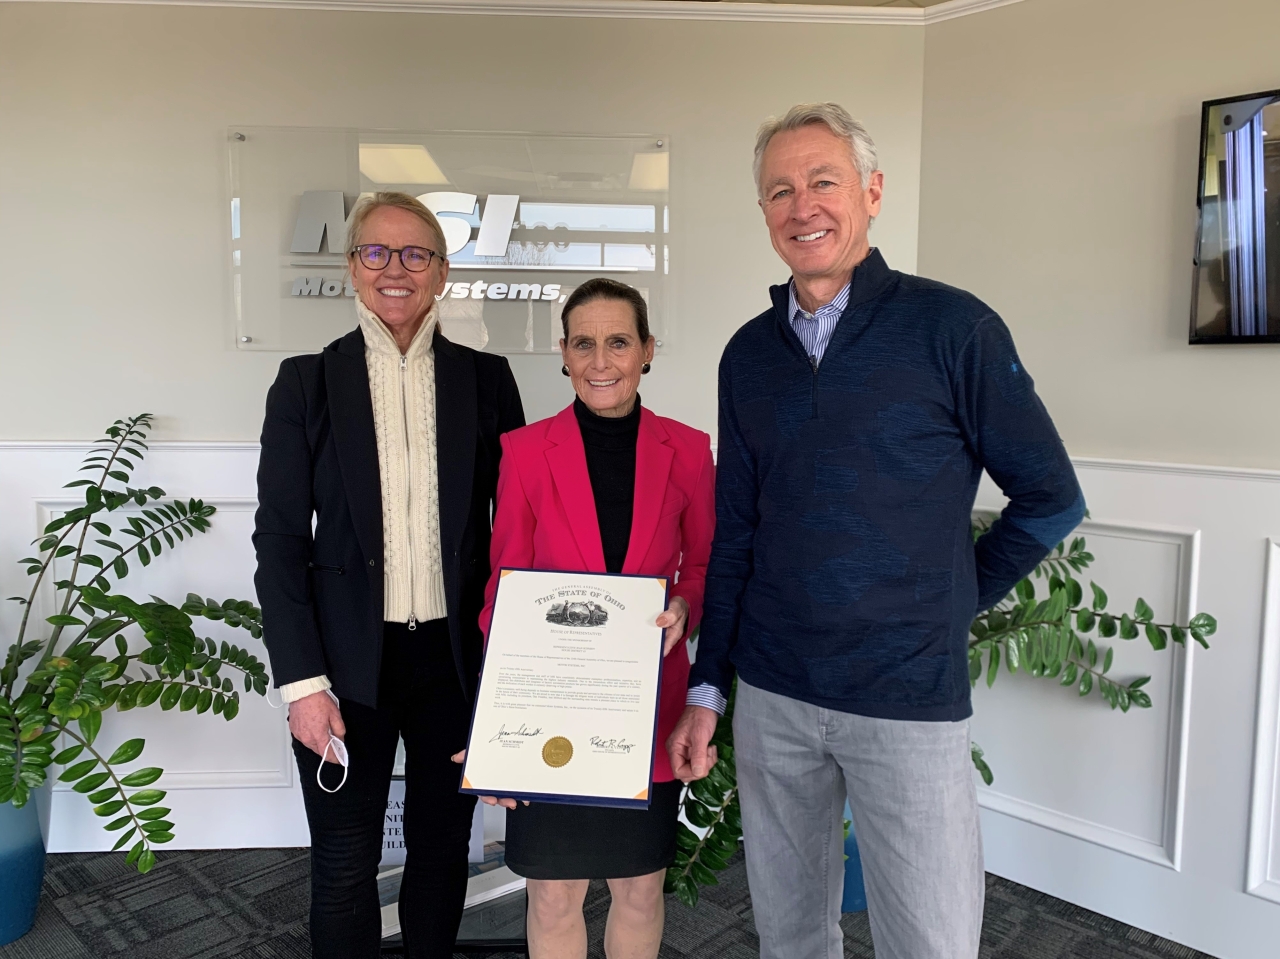 Rep. Schmidt congratulates owners Dan and Jill Freshley of Motor Systems, Inc. in Milford on the occasion of their 25th Anniversary.